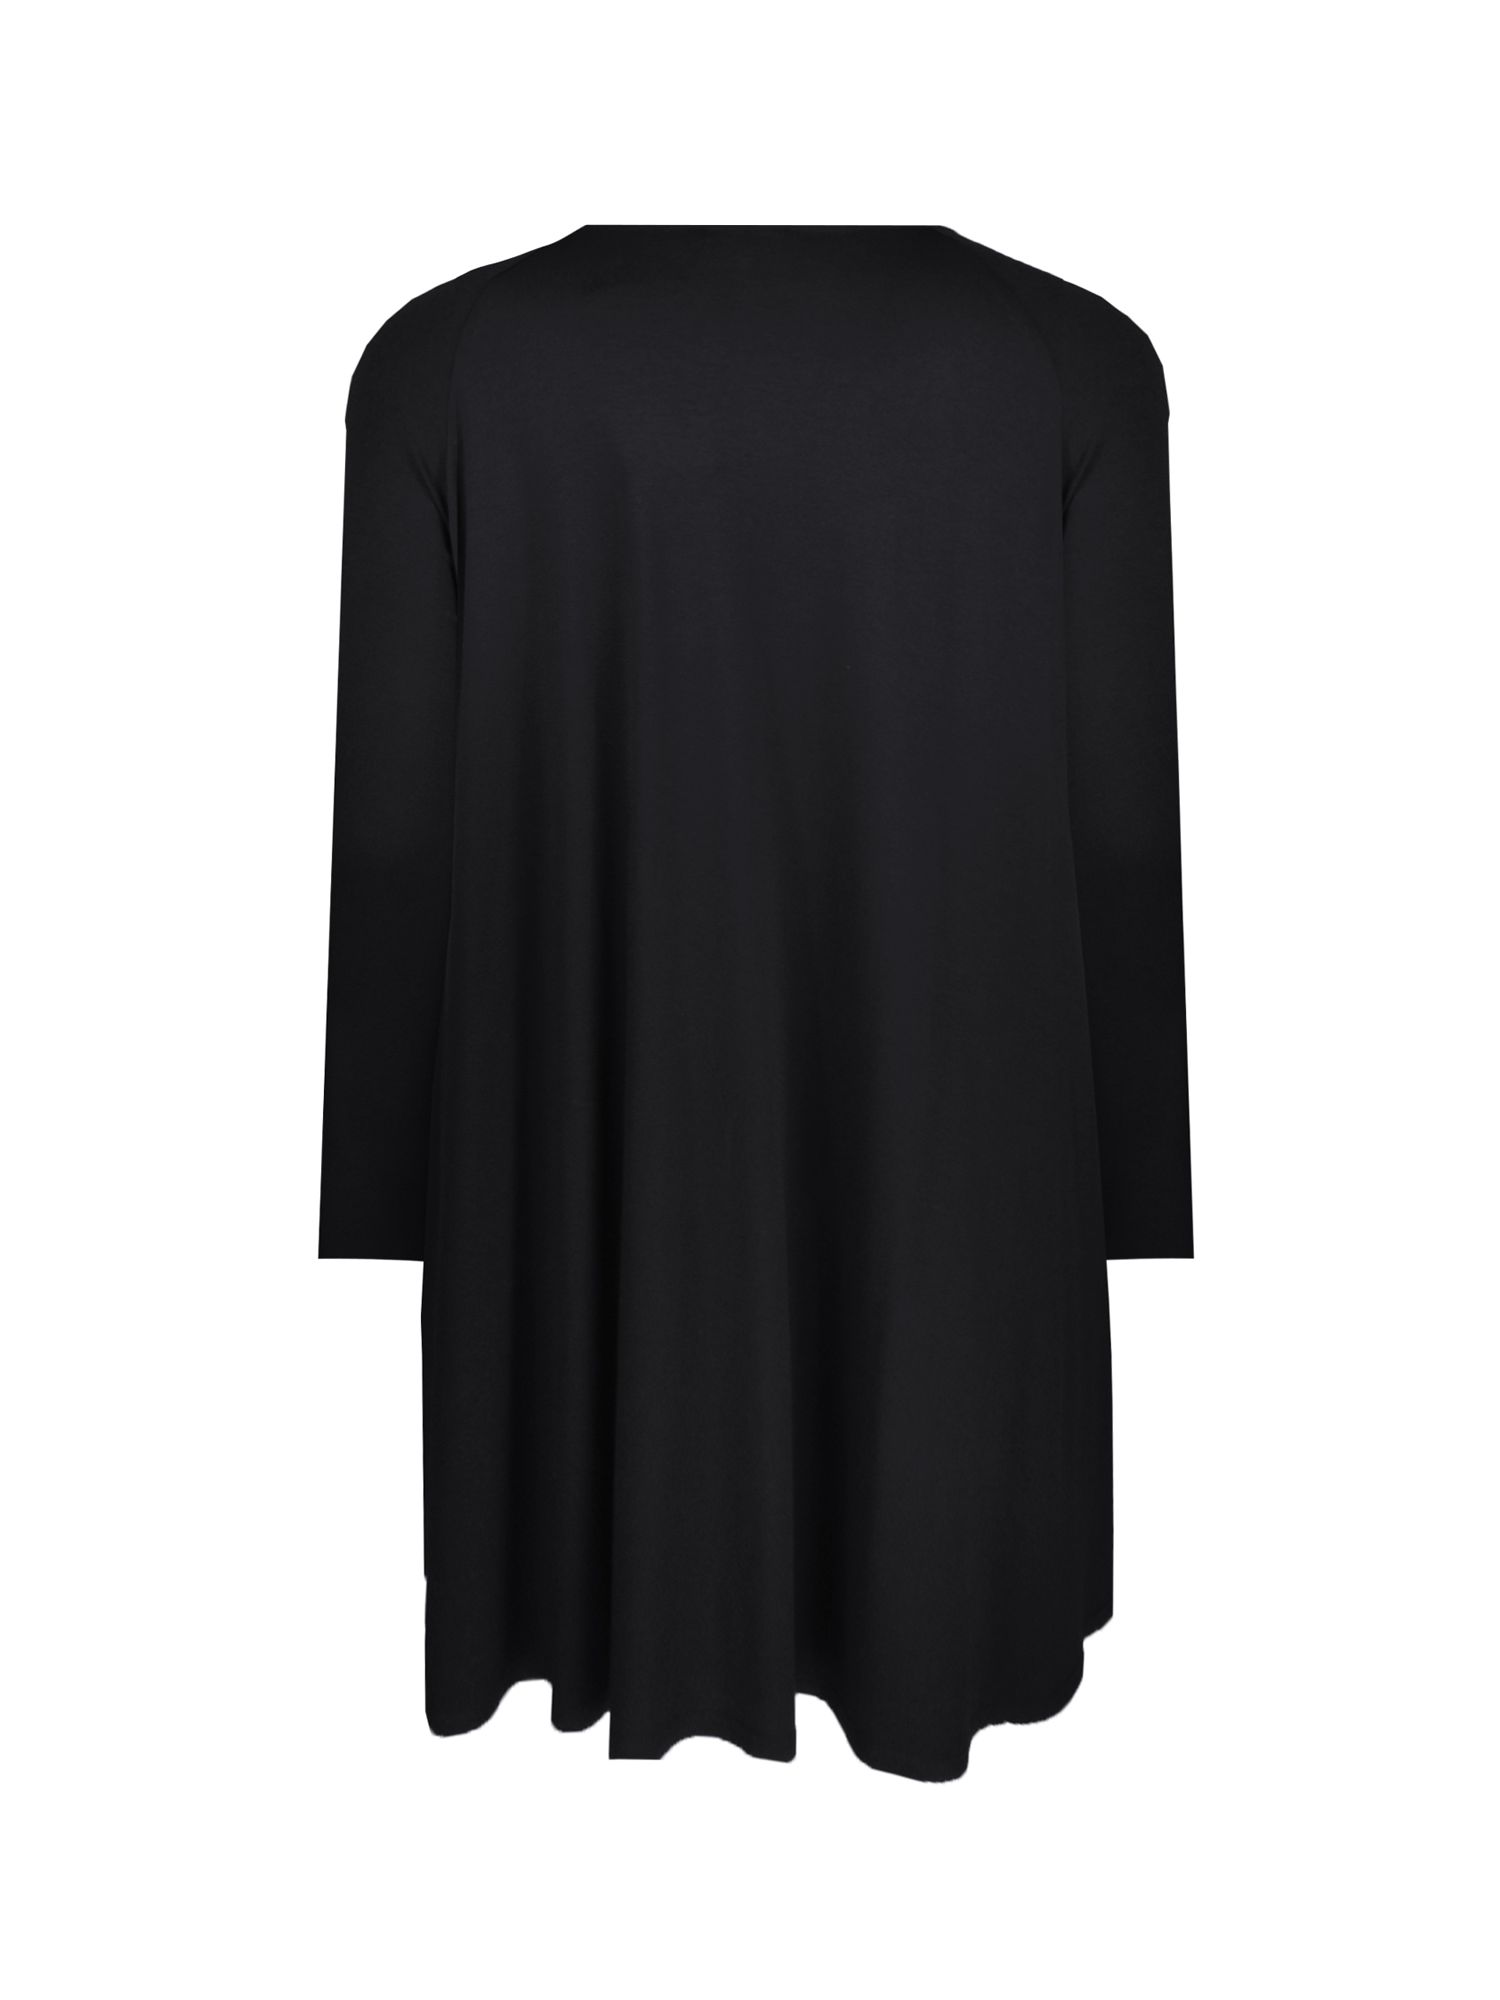 Live Unlimited Frill Tunic Top, Black